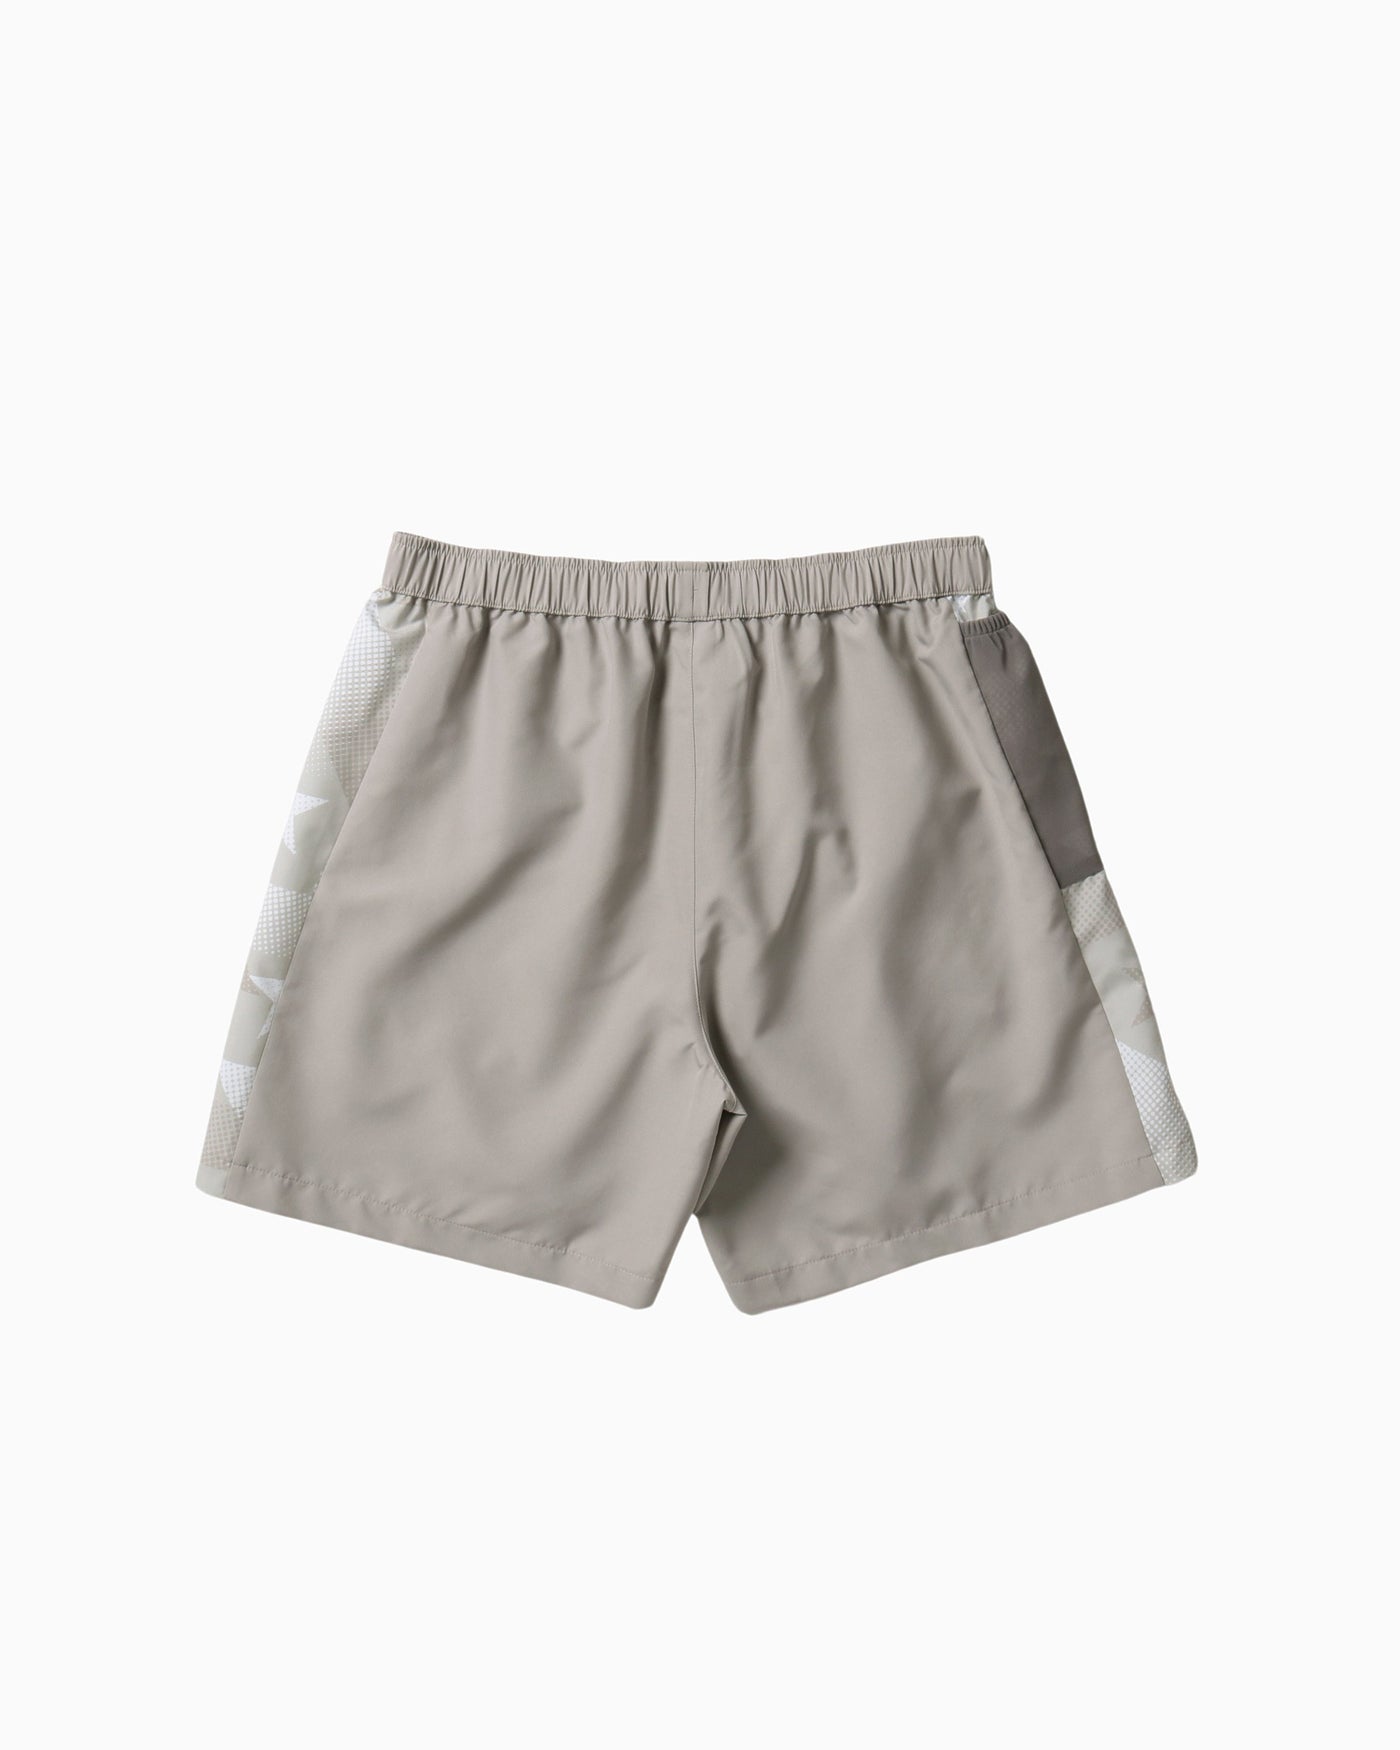 SP WOVEN SHORTS